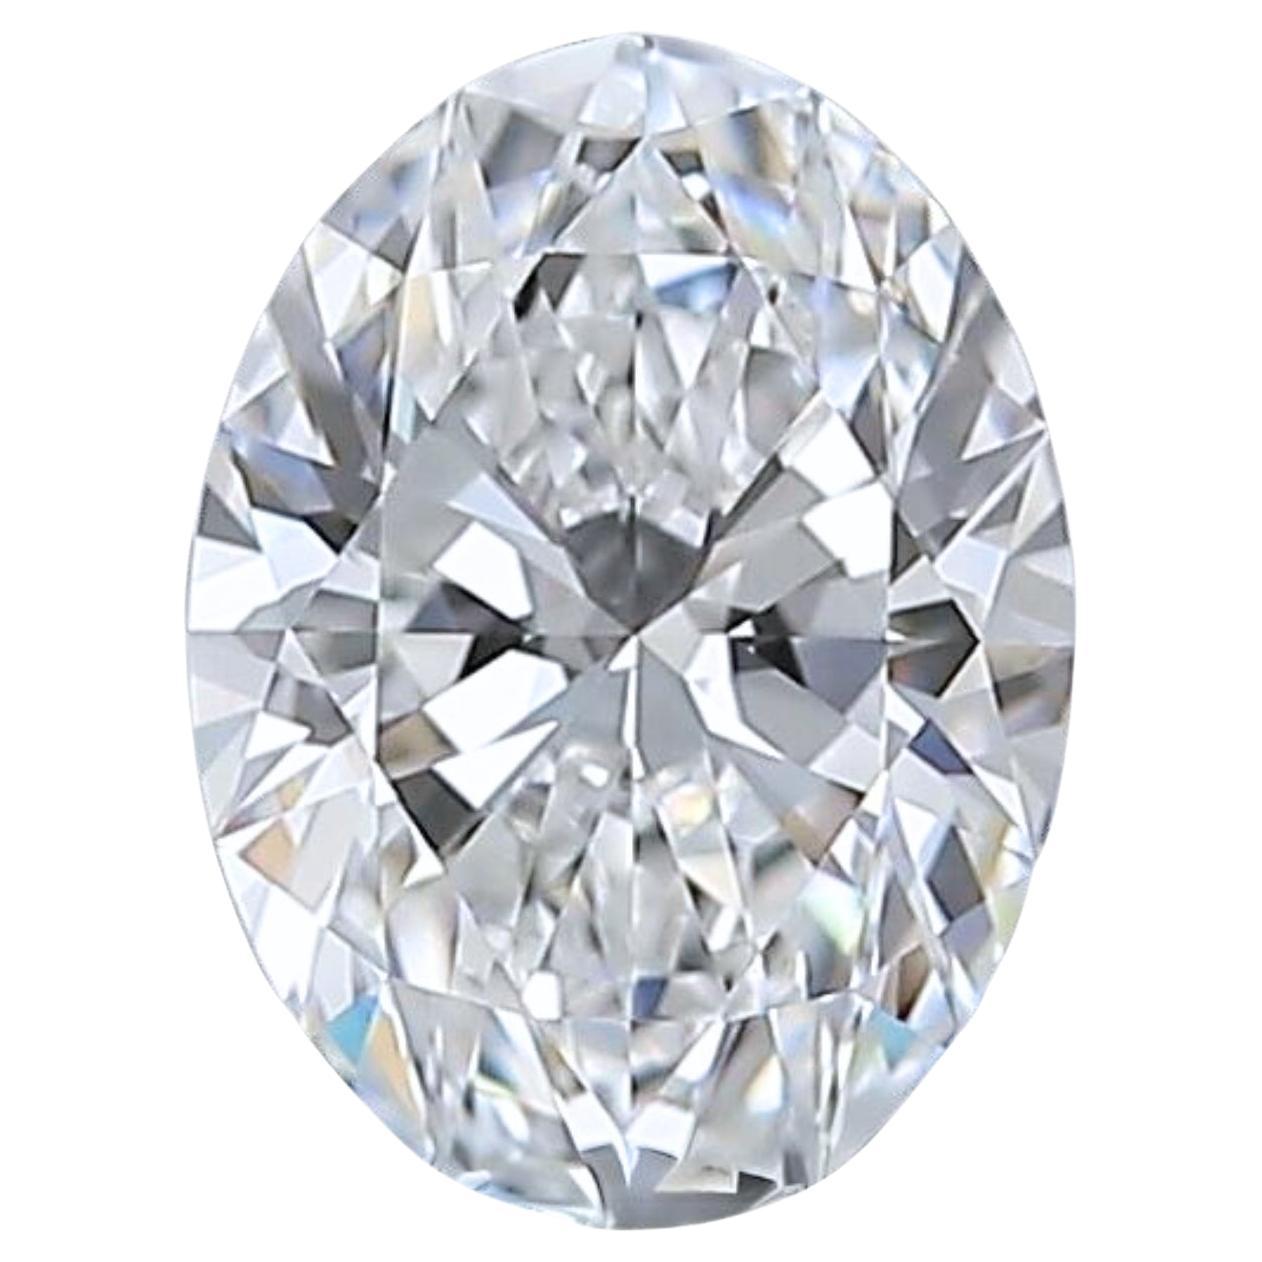 Stunning 1.01ct Double Excellent Ideal Cut Diamond - GIA Certified 